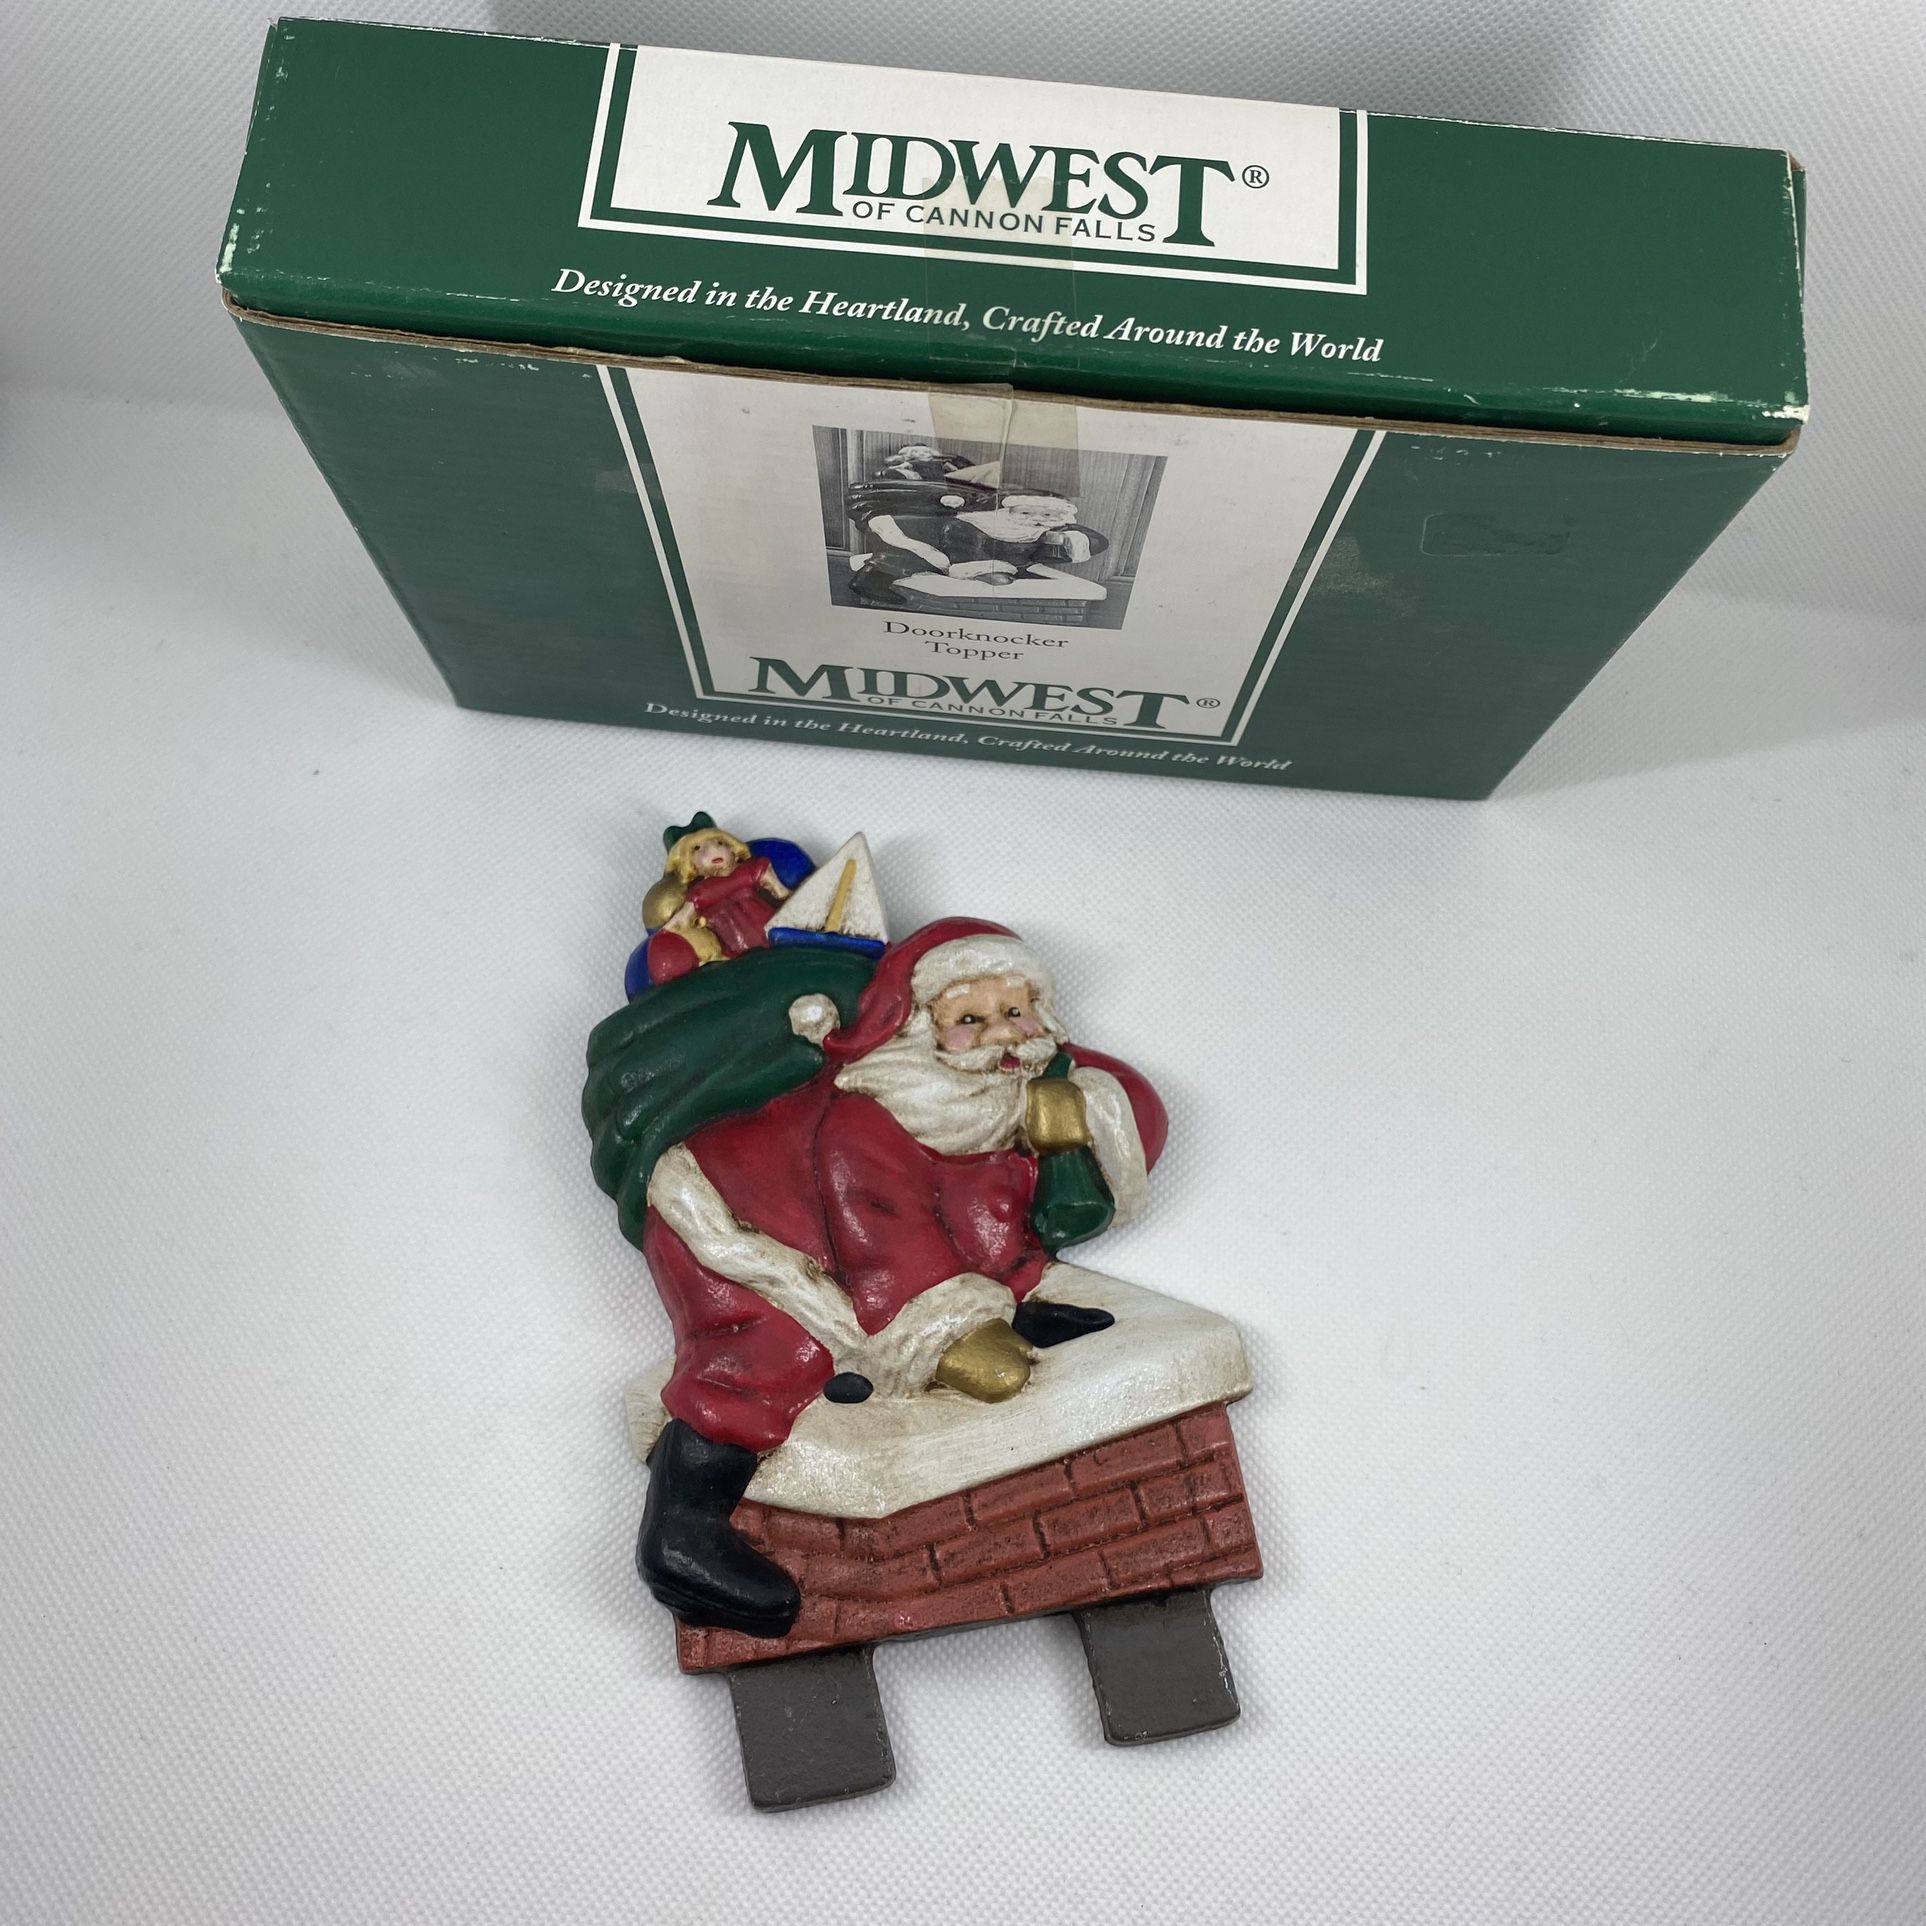 Midwest of Cannon Falls - Cast Iron Doorknocker Topper Christmas Santa Claus